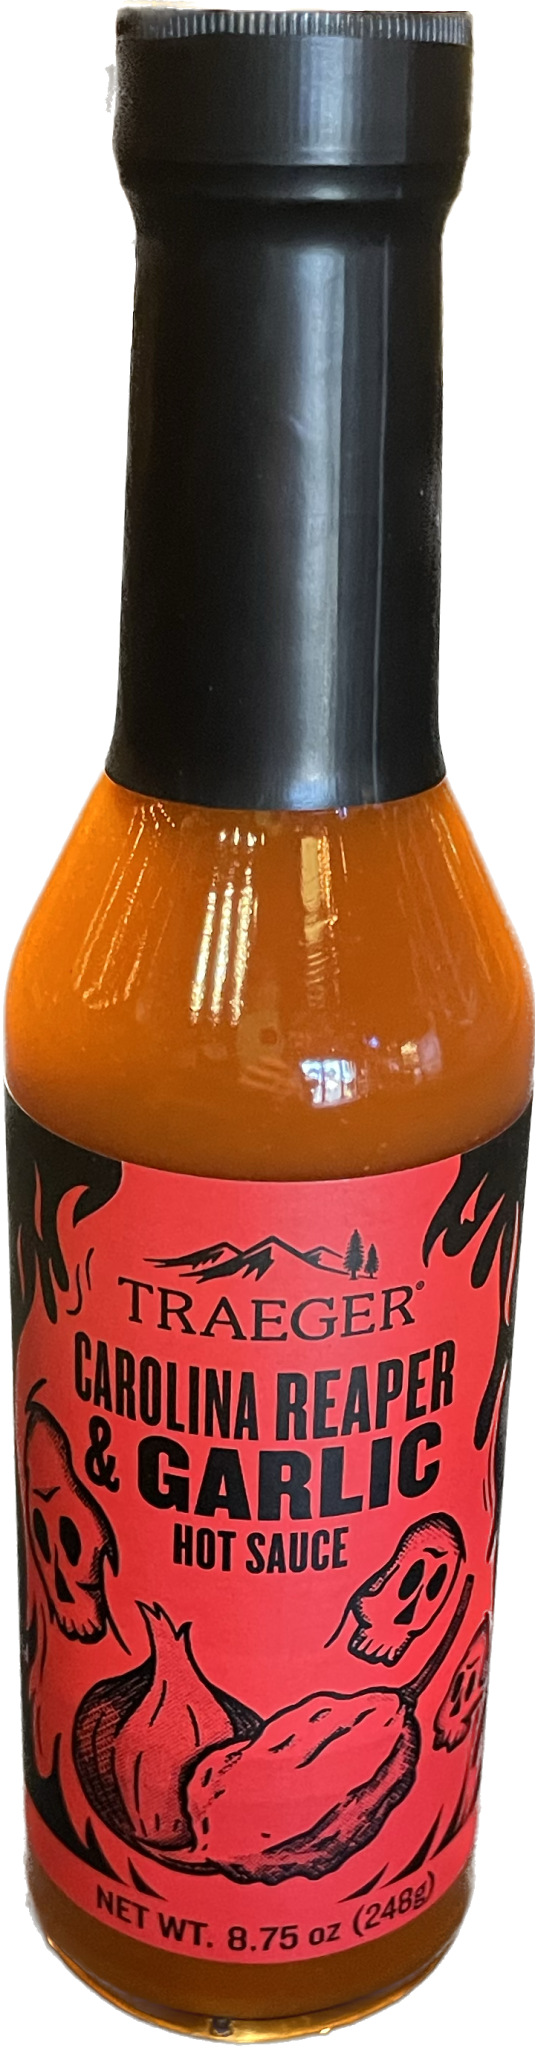 Traeger 8.75 oz. Smoky Chipotle & Ghost Pepper Hot Sauce